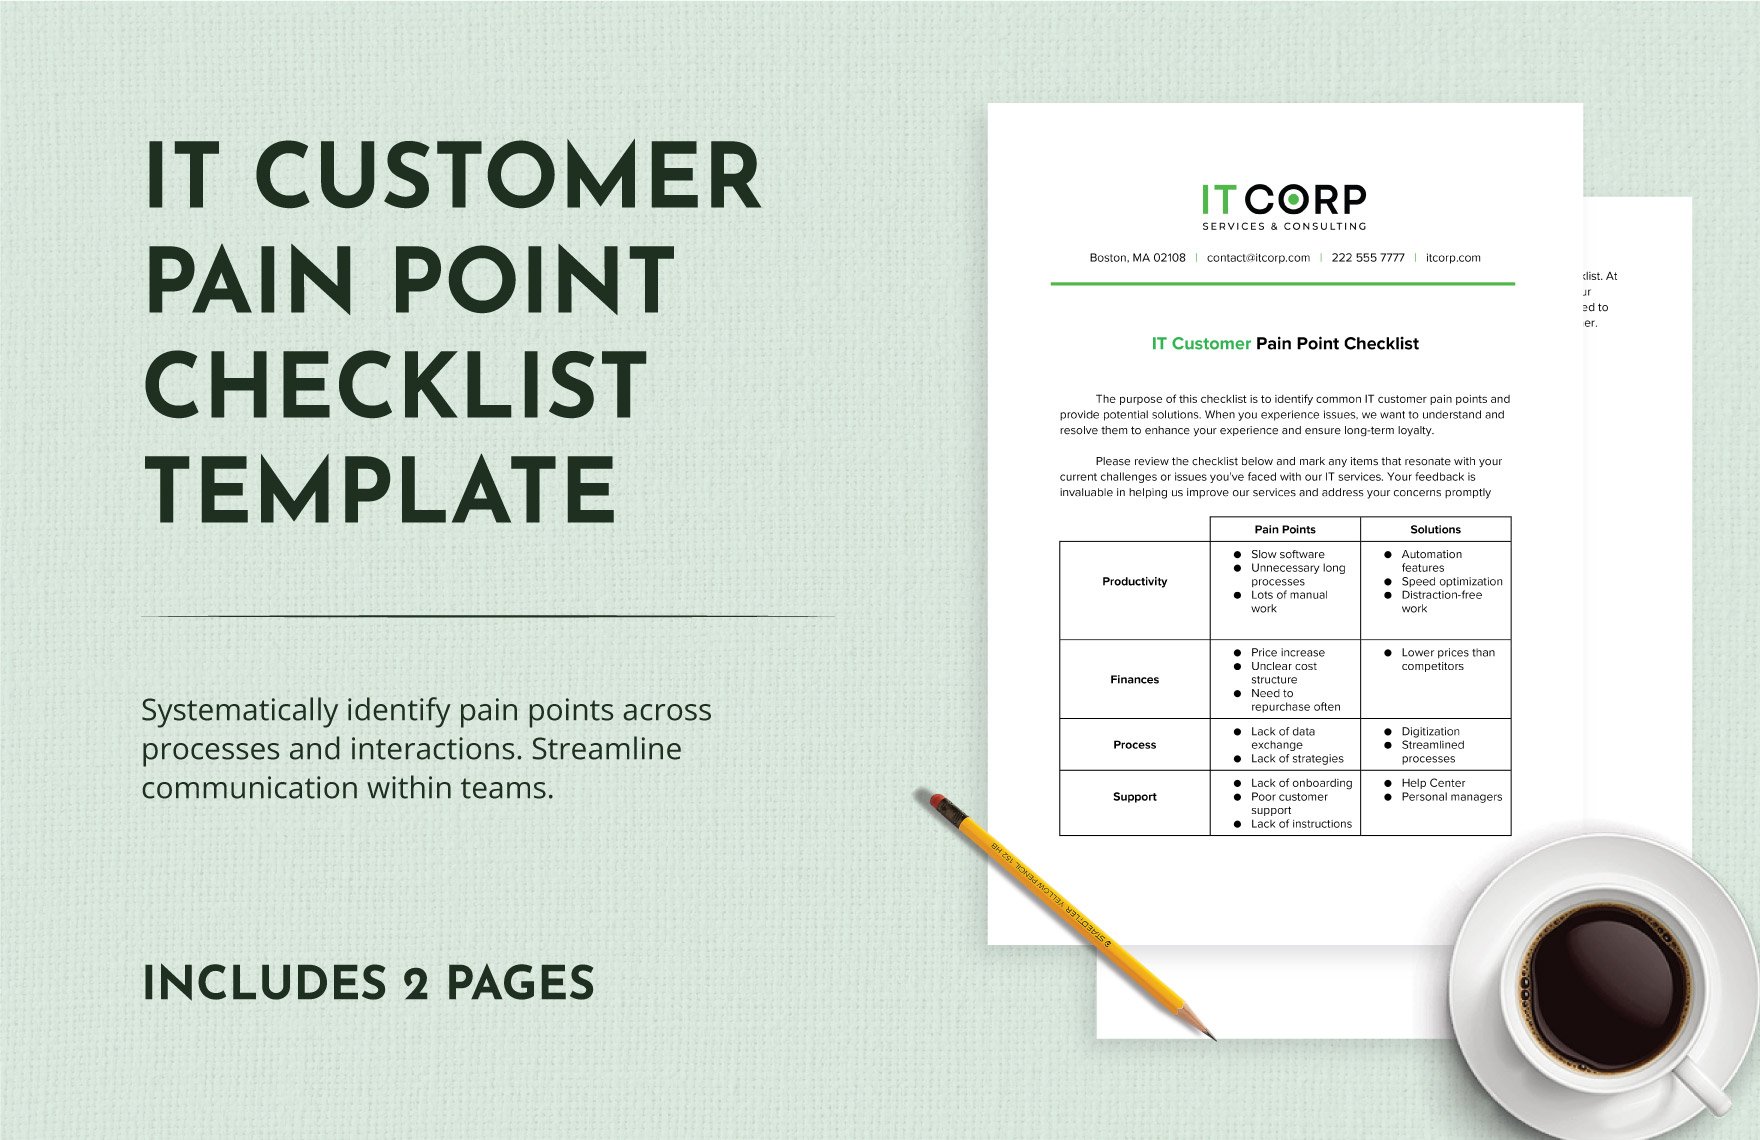 IT Customer Pain Point Checklist Template in Word, Google Docs, PDF